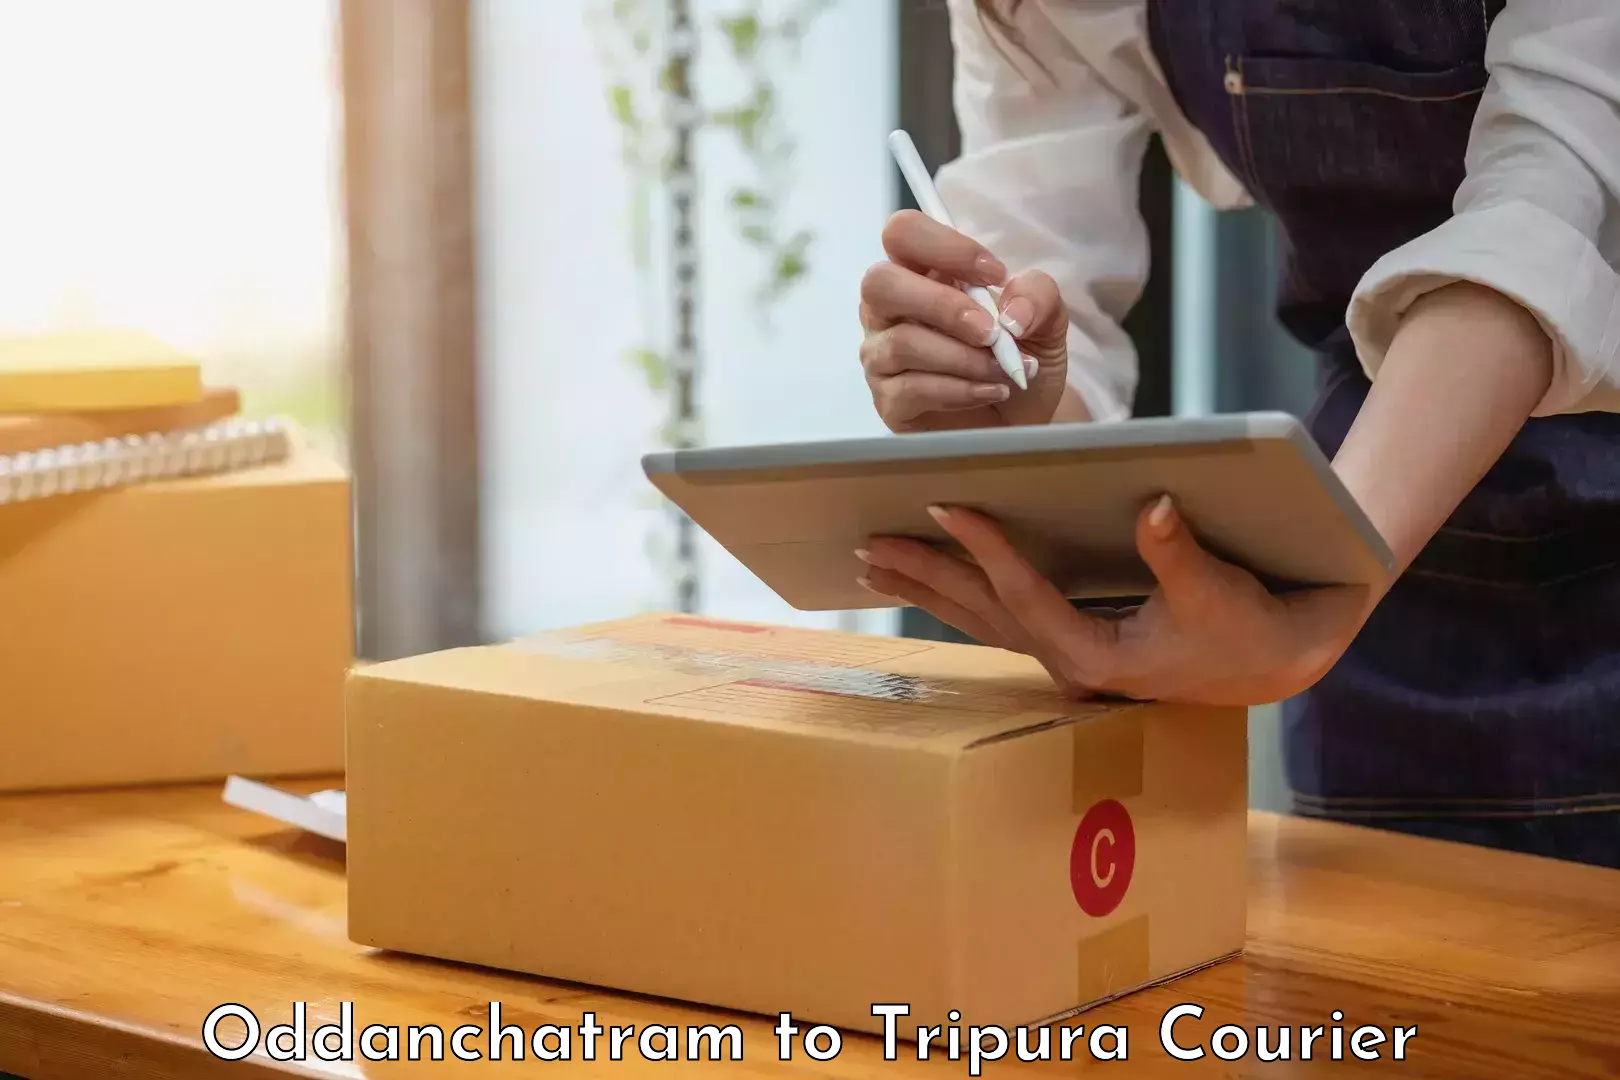 Multi-service courier options Oddanchatram to North Tripura